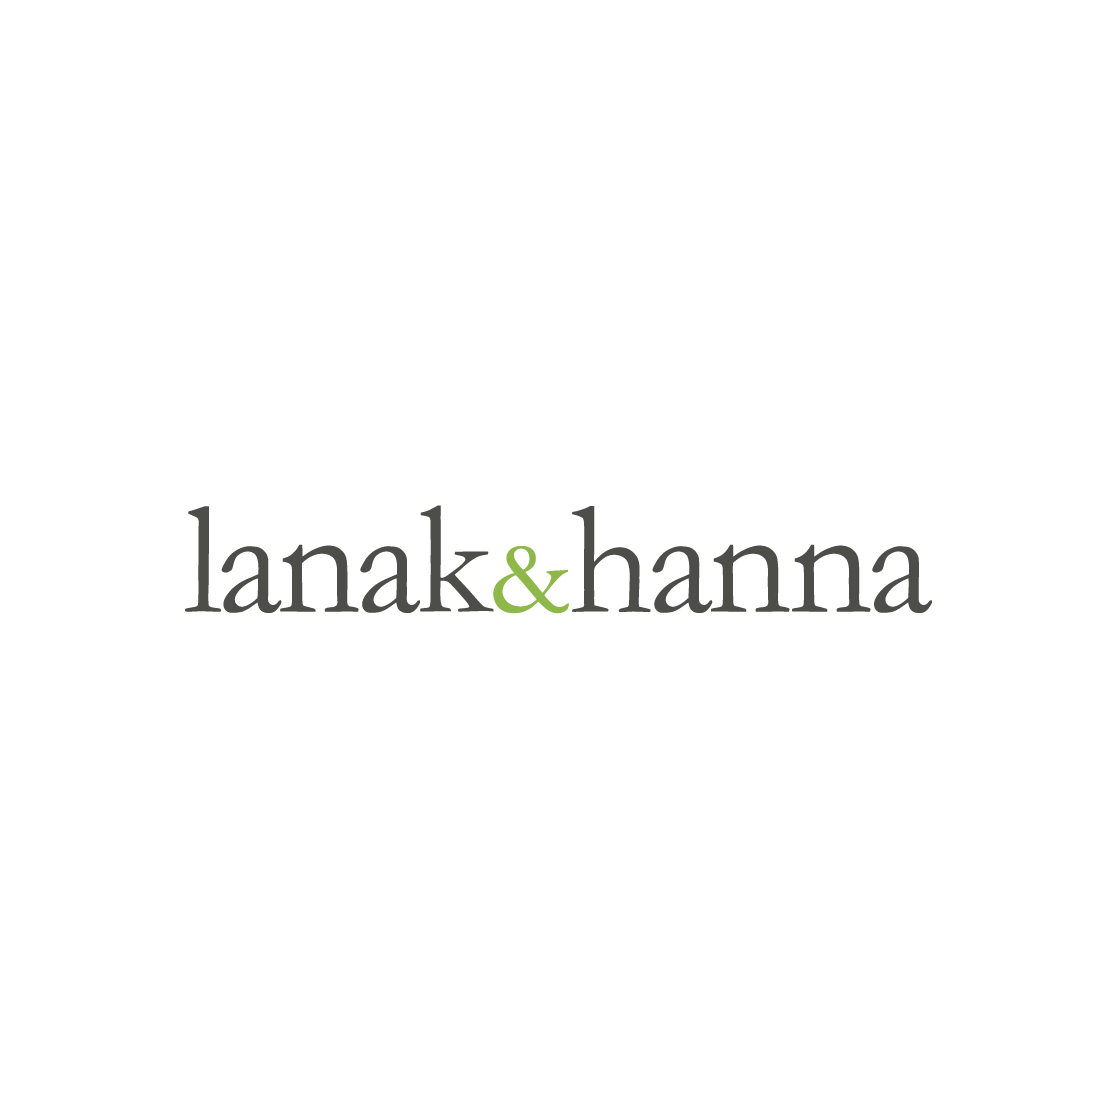 Typographic logo variation for Lanak Hanna Law Firm